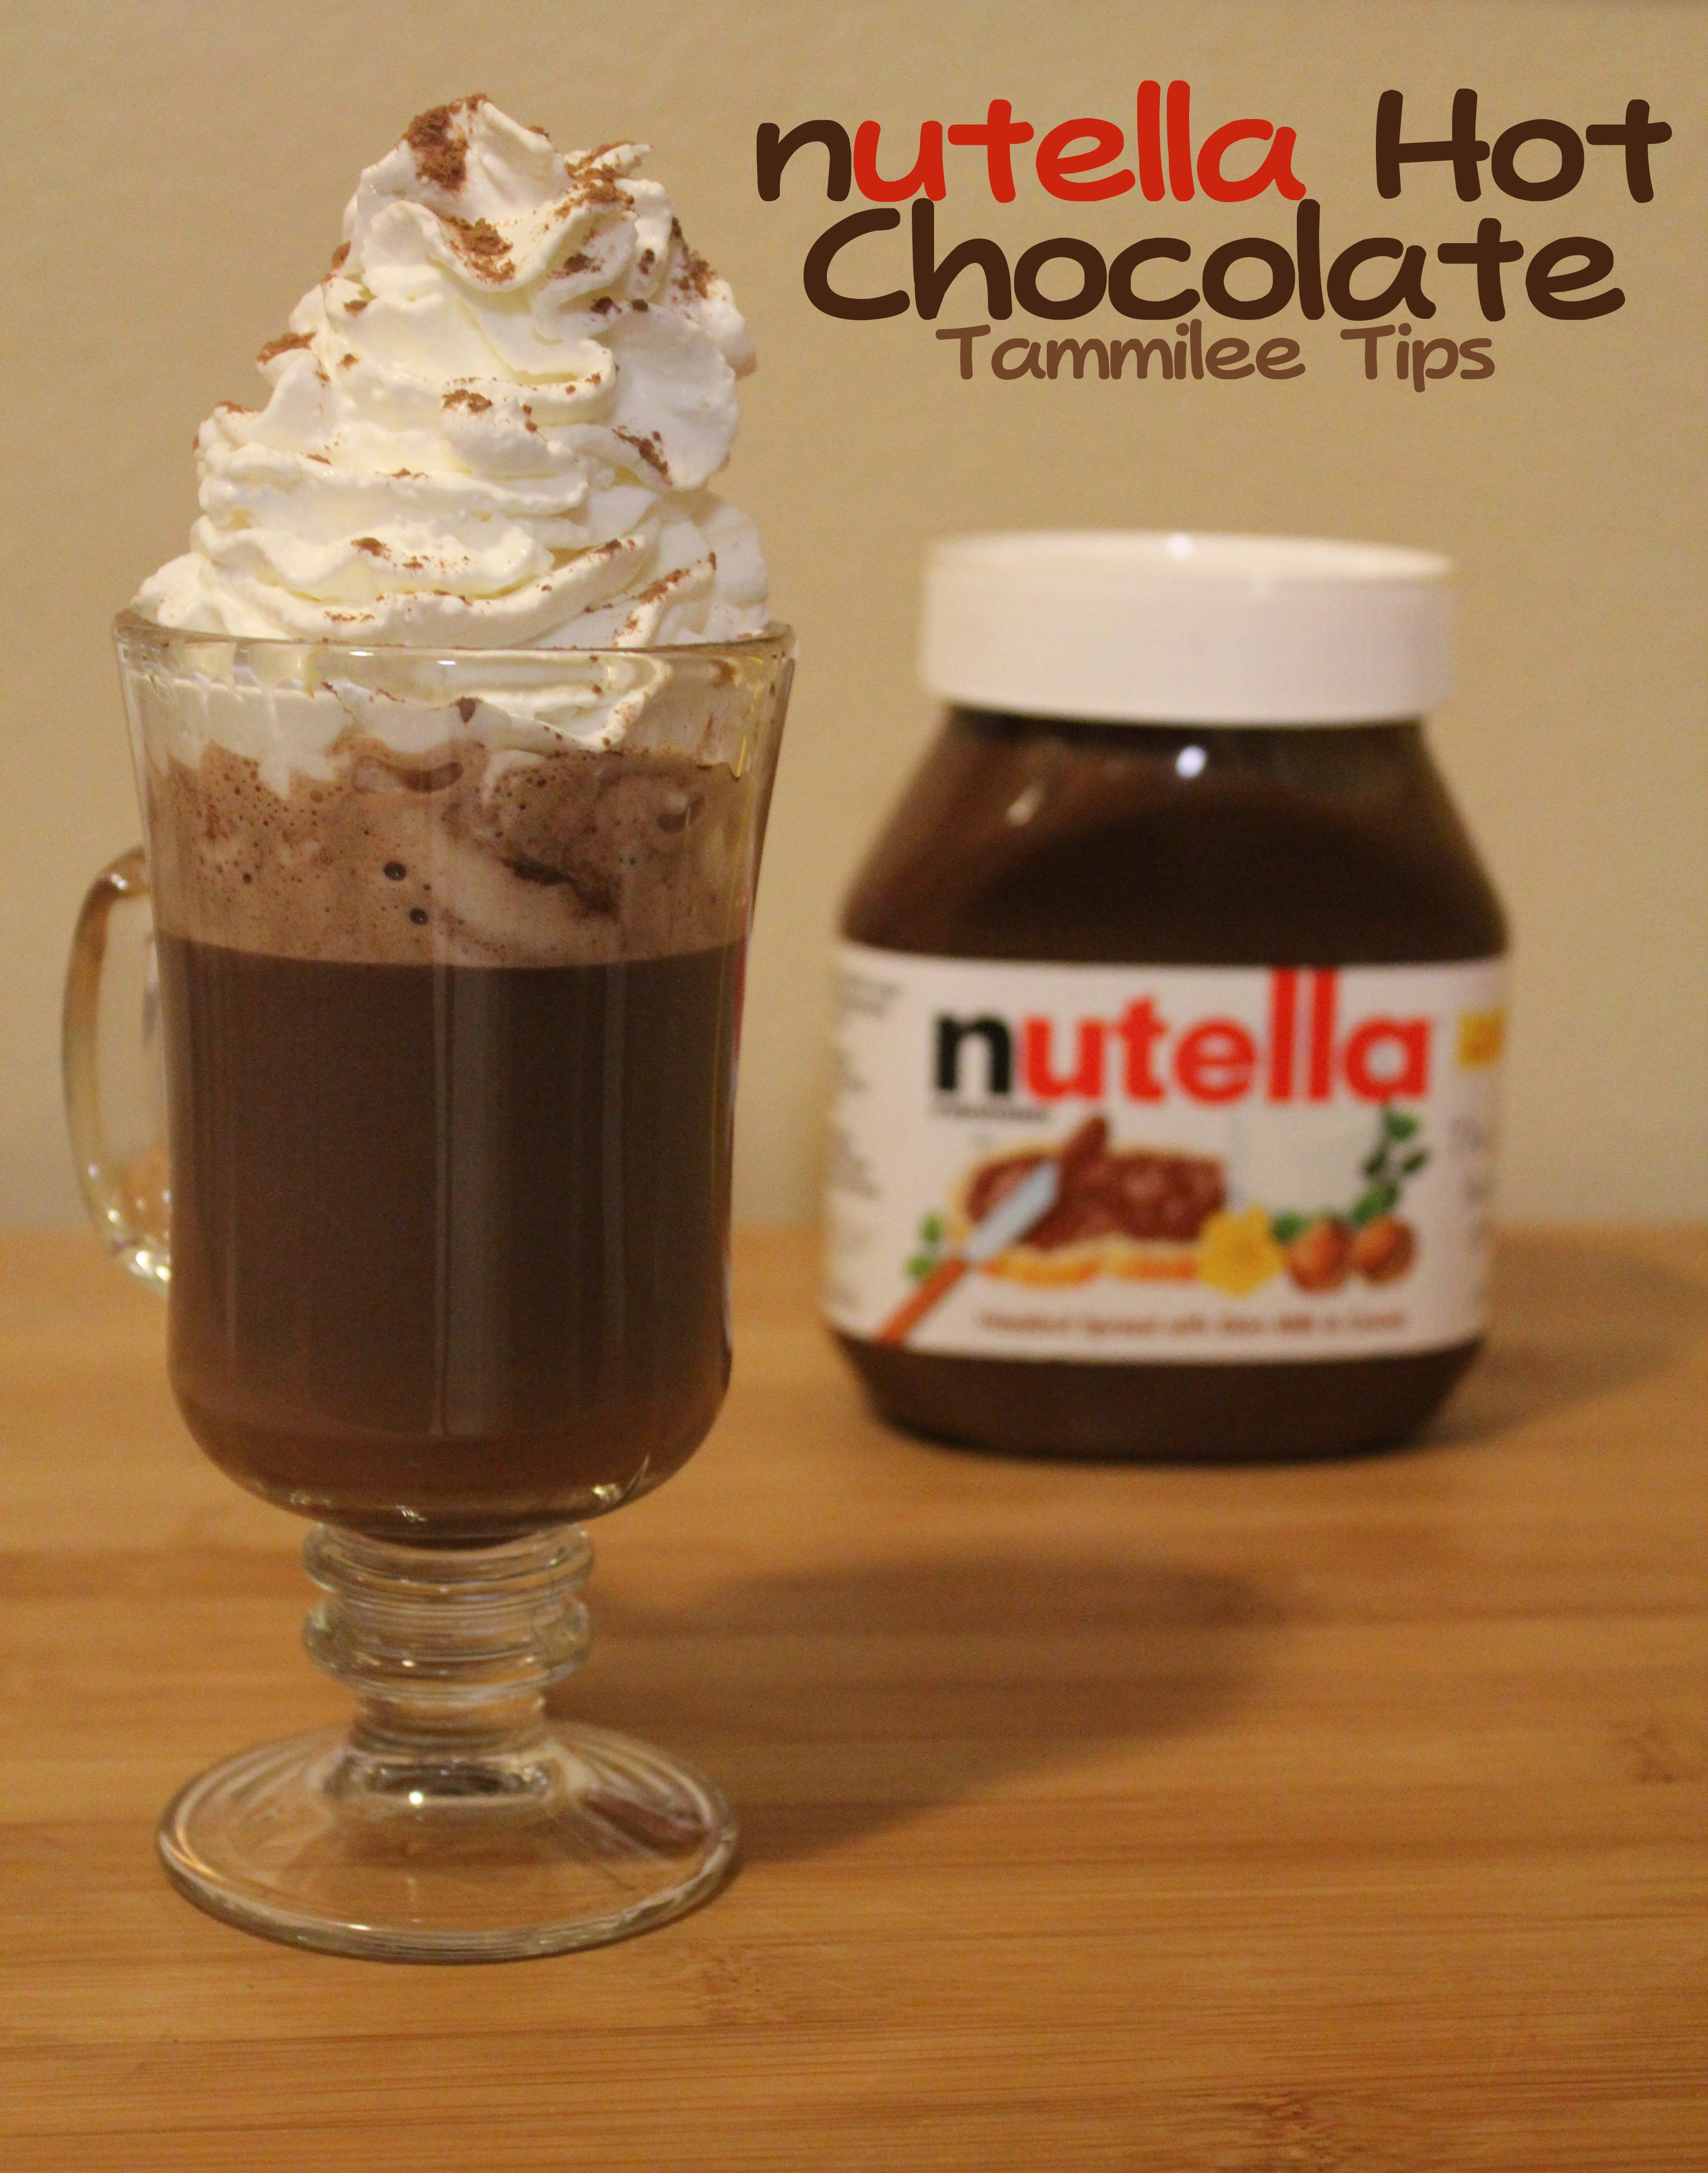 Nutella makes everything better! Source:http://www.tammileetips.com